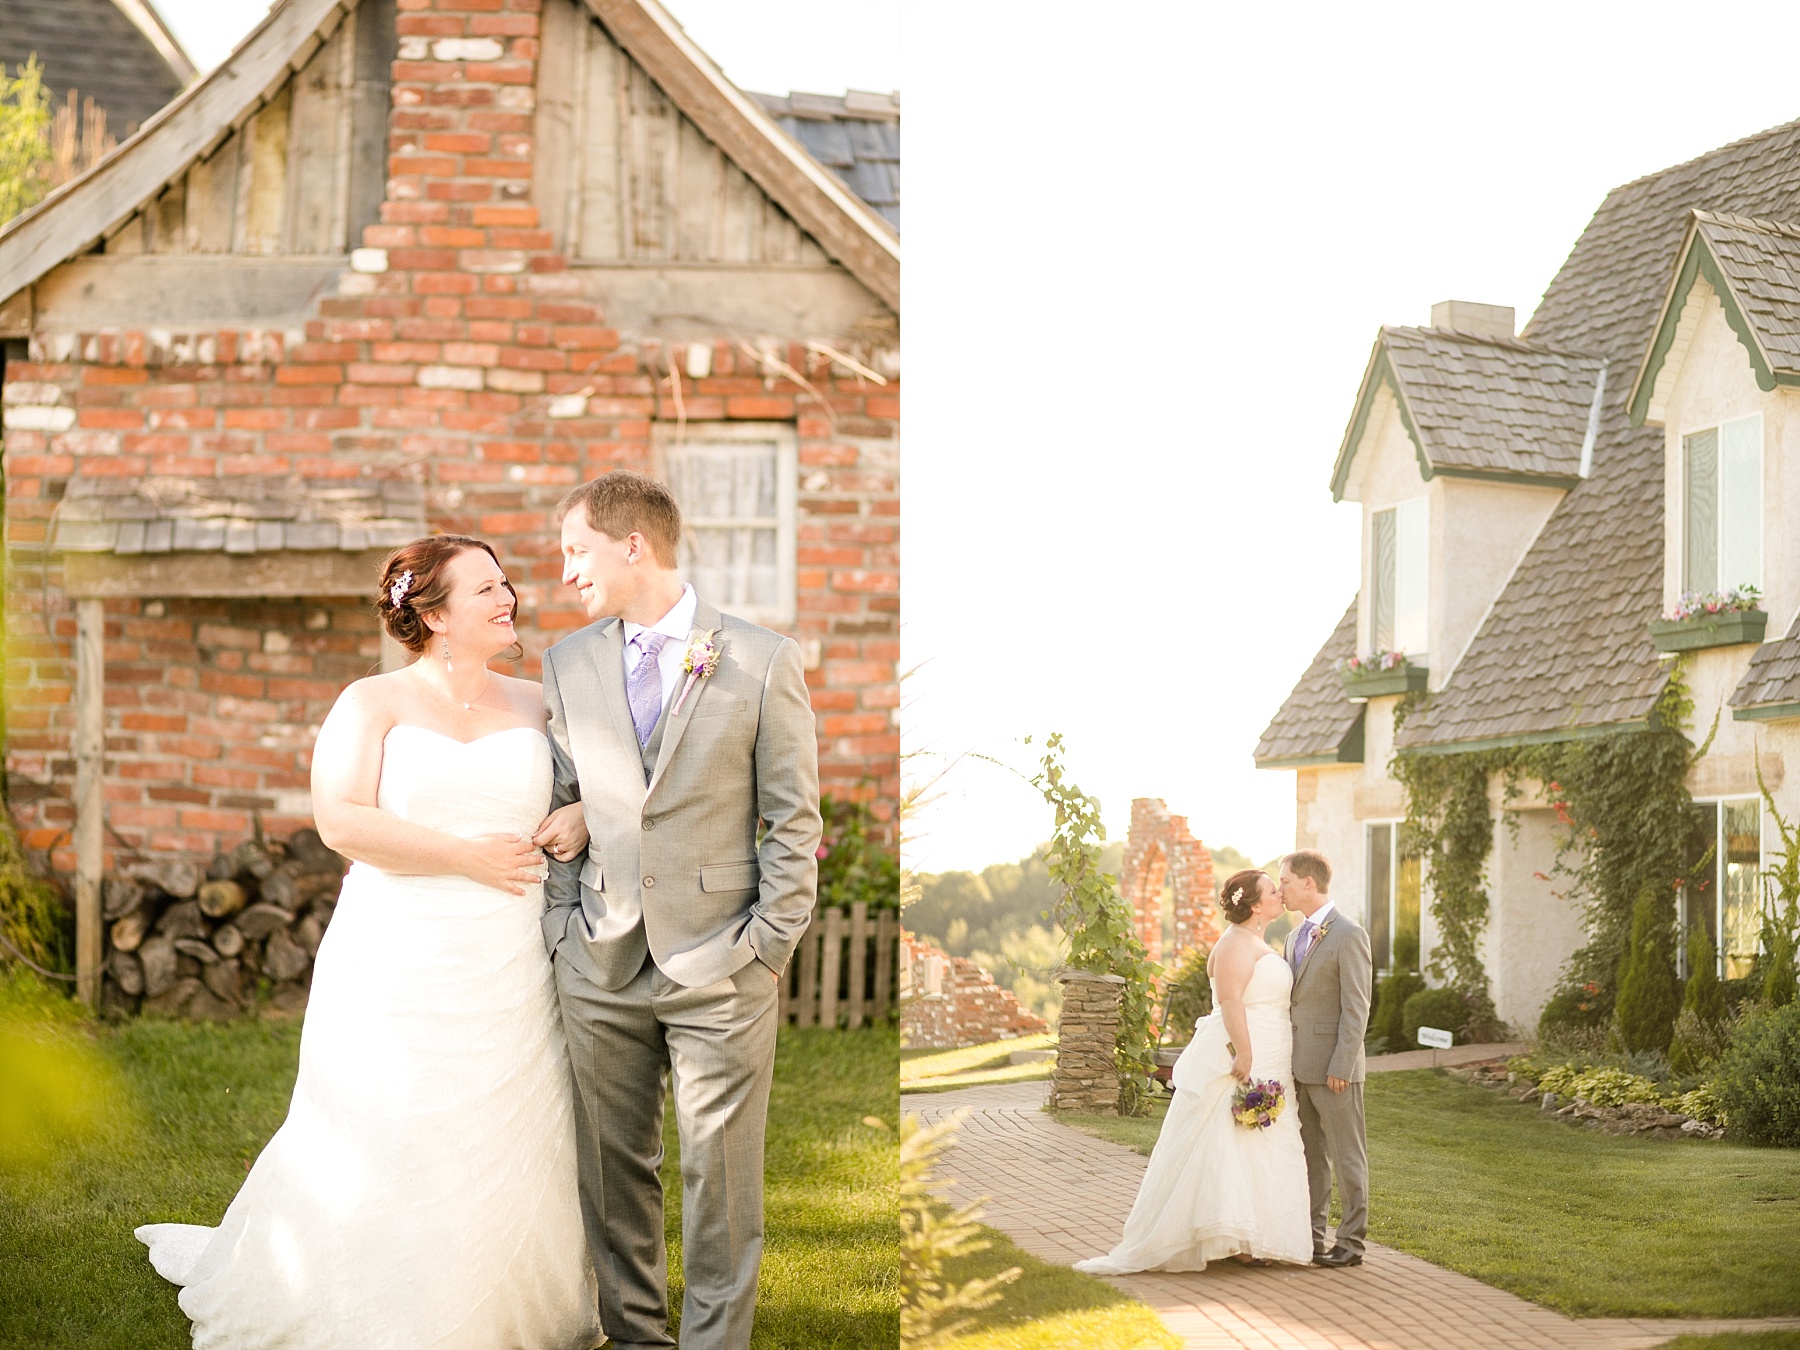 A sunny midwest day made for the perfect day to say I Do at Cottage Winery and Vineyard wedding.